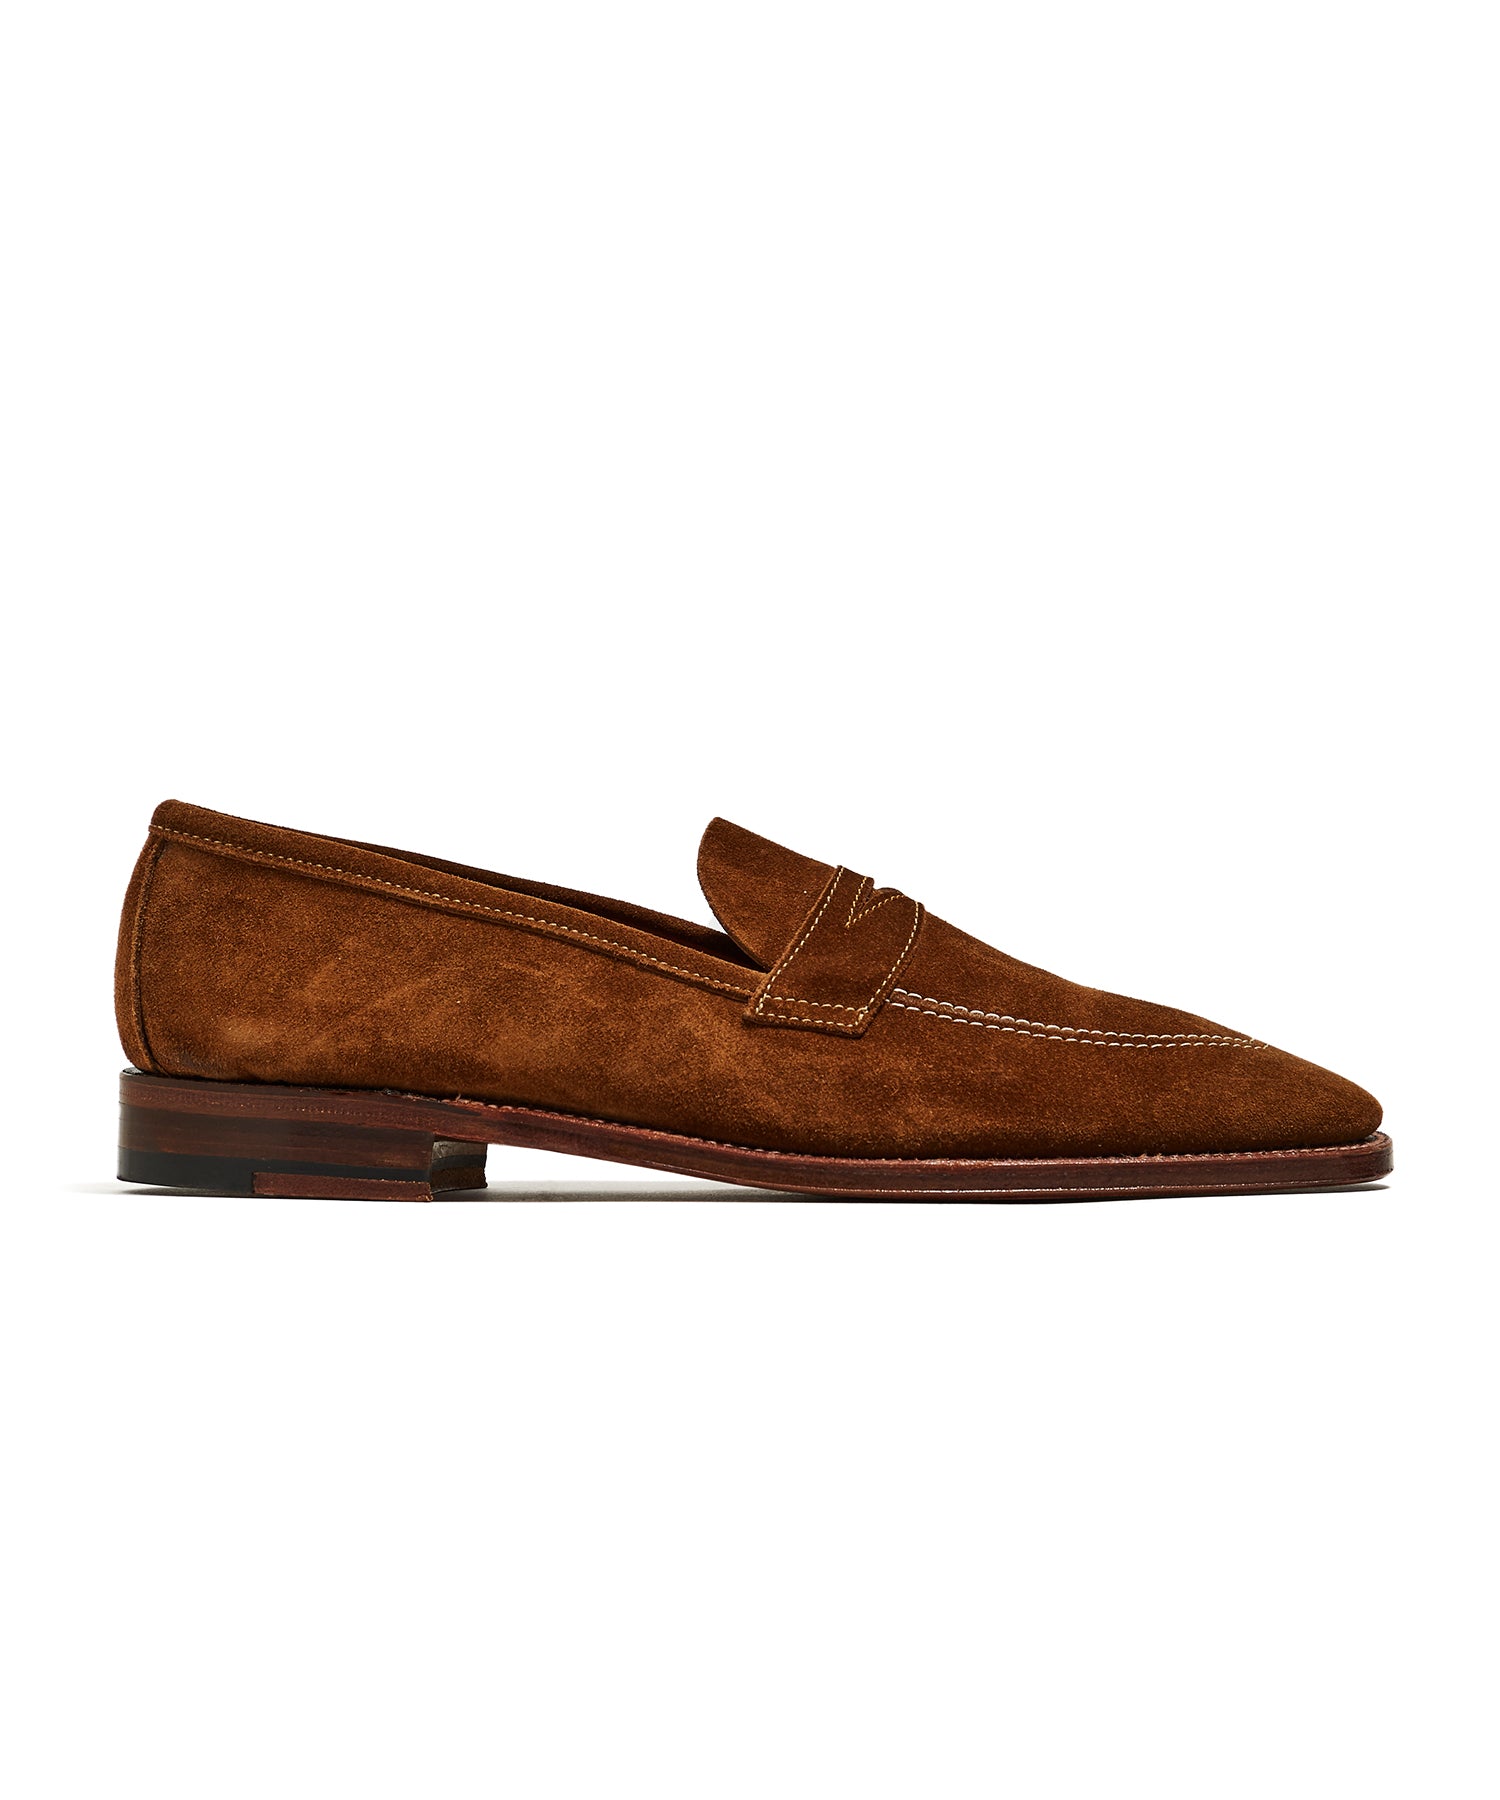 Todd Snyder Snuff Suede Penny Loafer